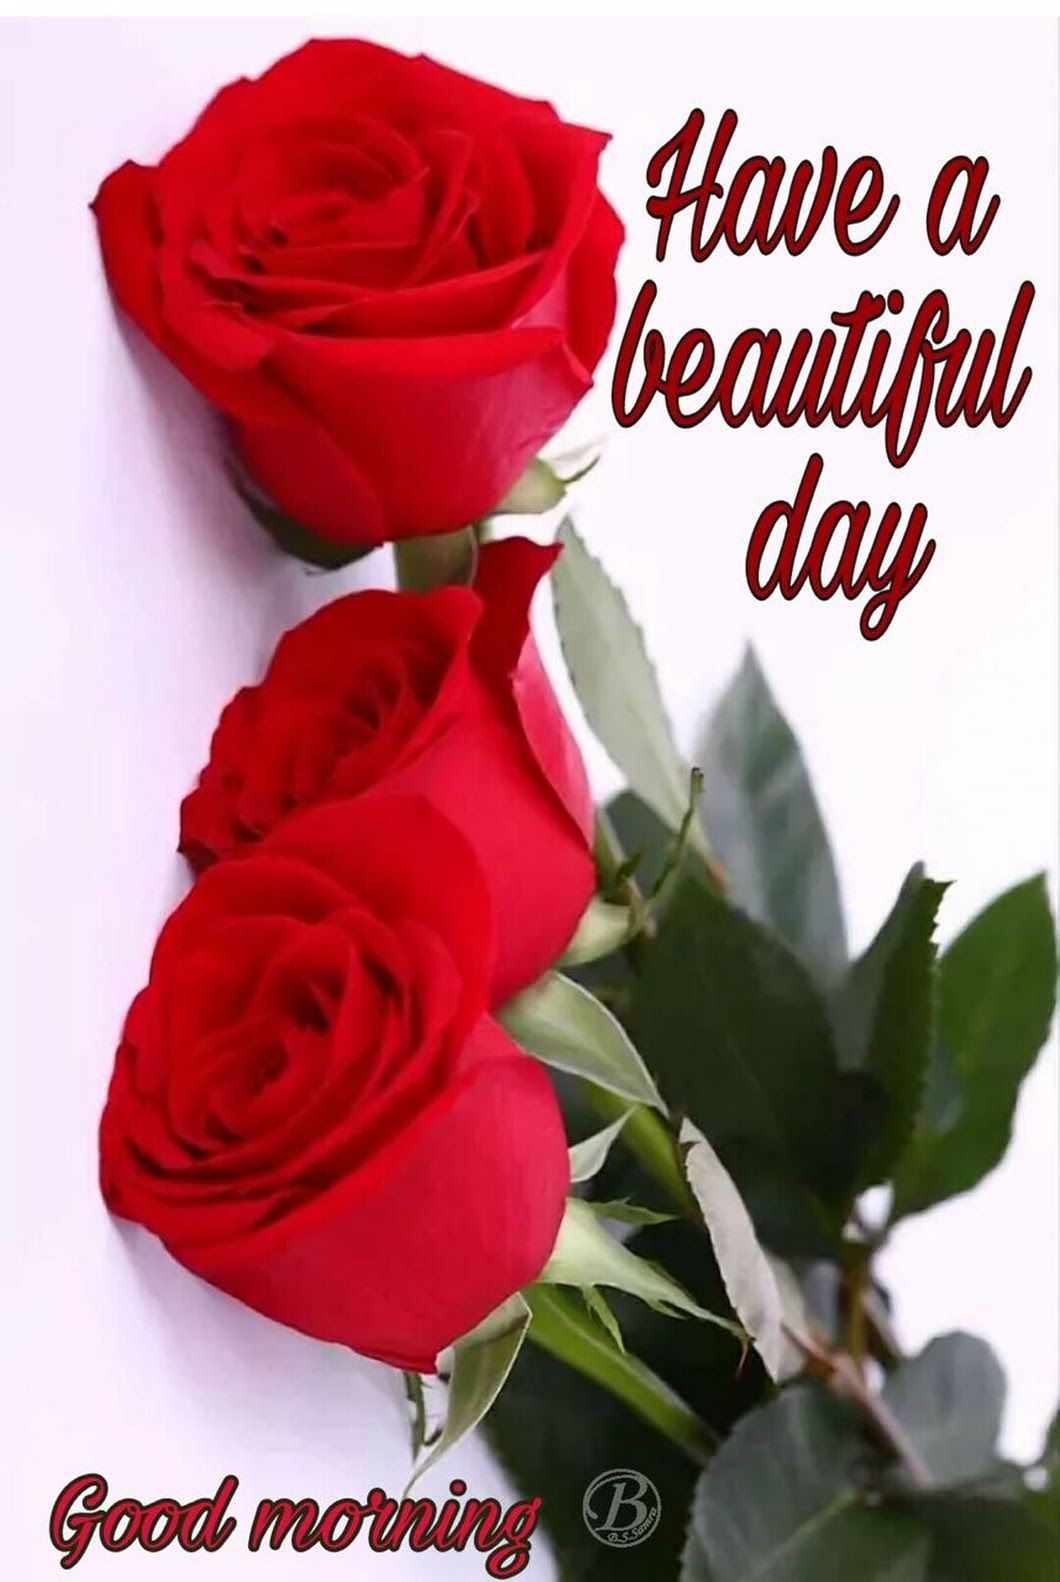 Good Morning Friends - Good Morning Friend With Roses , HD Wallpaper & Backgrounds